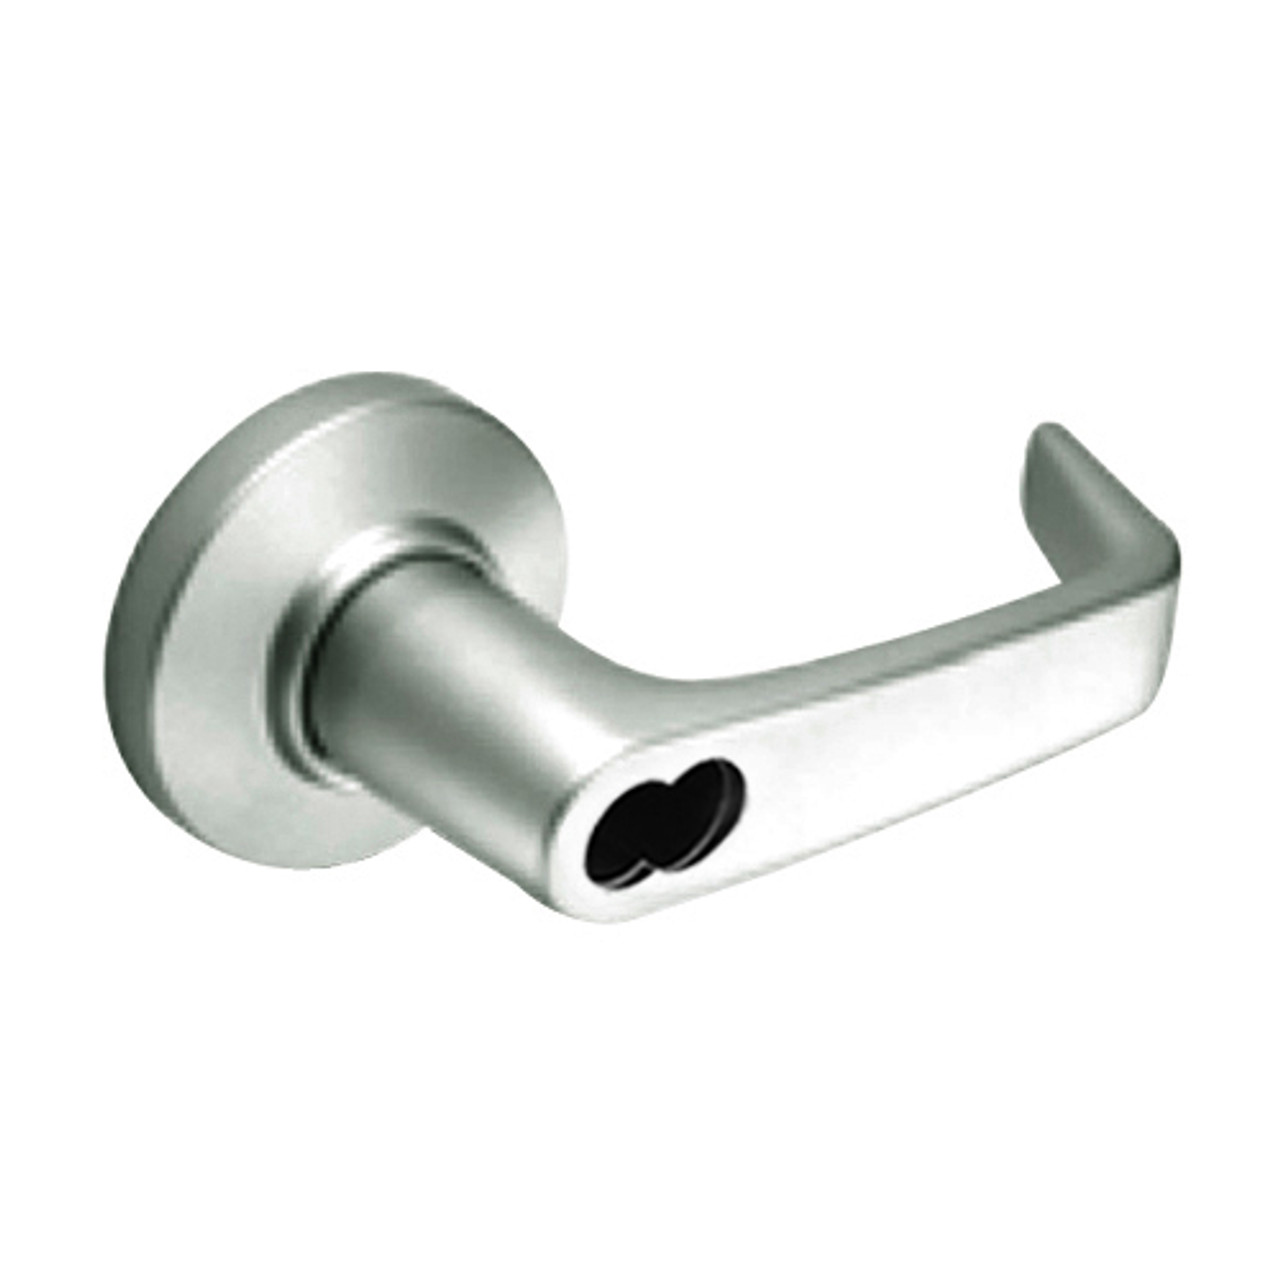 9K37XR15CS3619 Best 9K Series Special Function Cylindrical Lever Locks with Contour Angle with Return Lever Design Accept 7 Pin Best Core in Satin Nickel